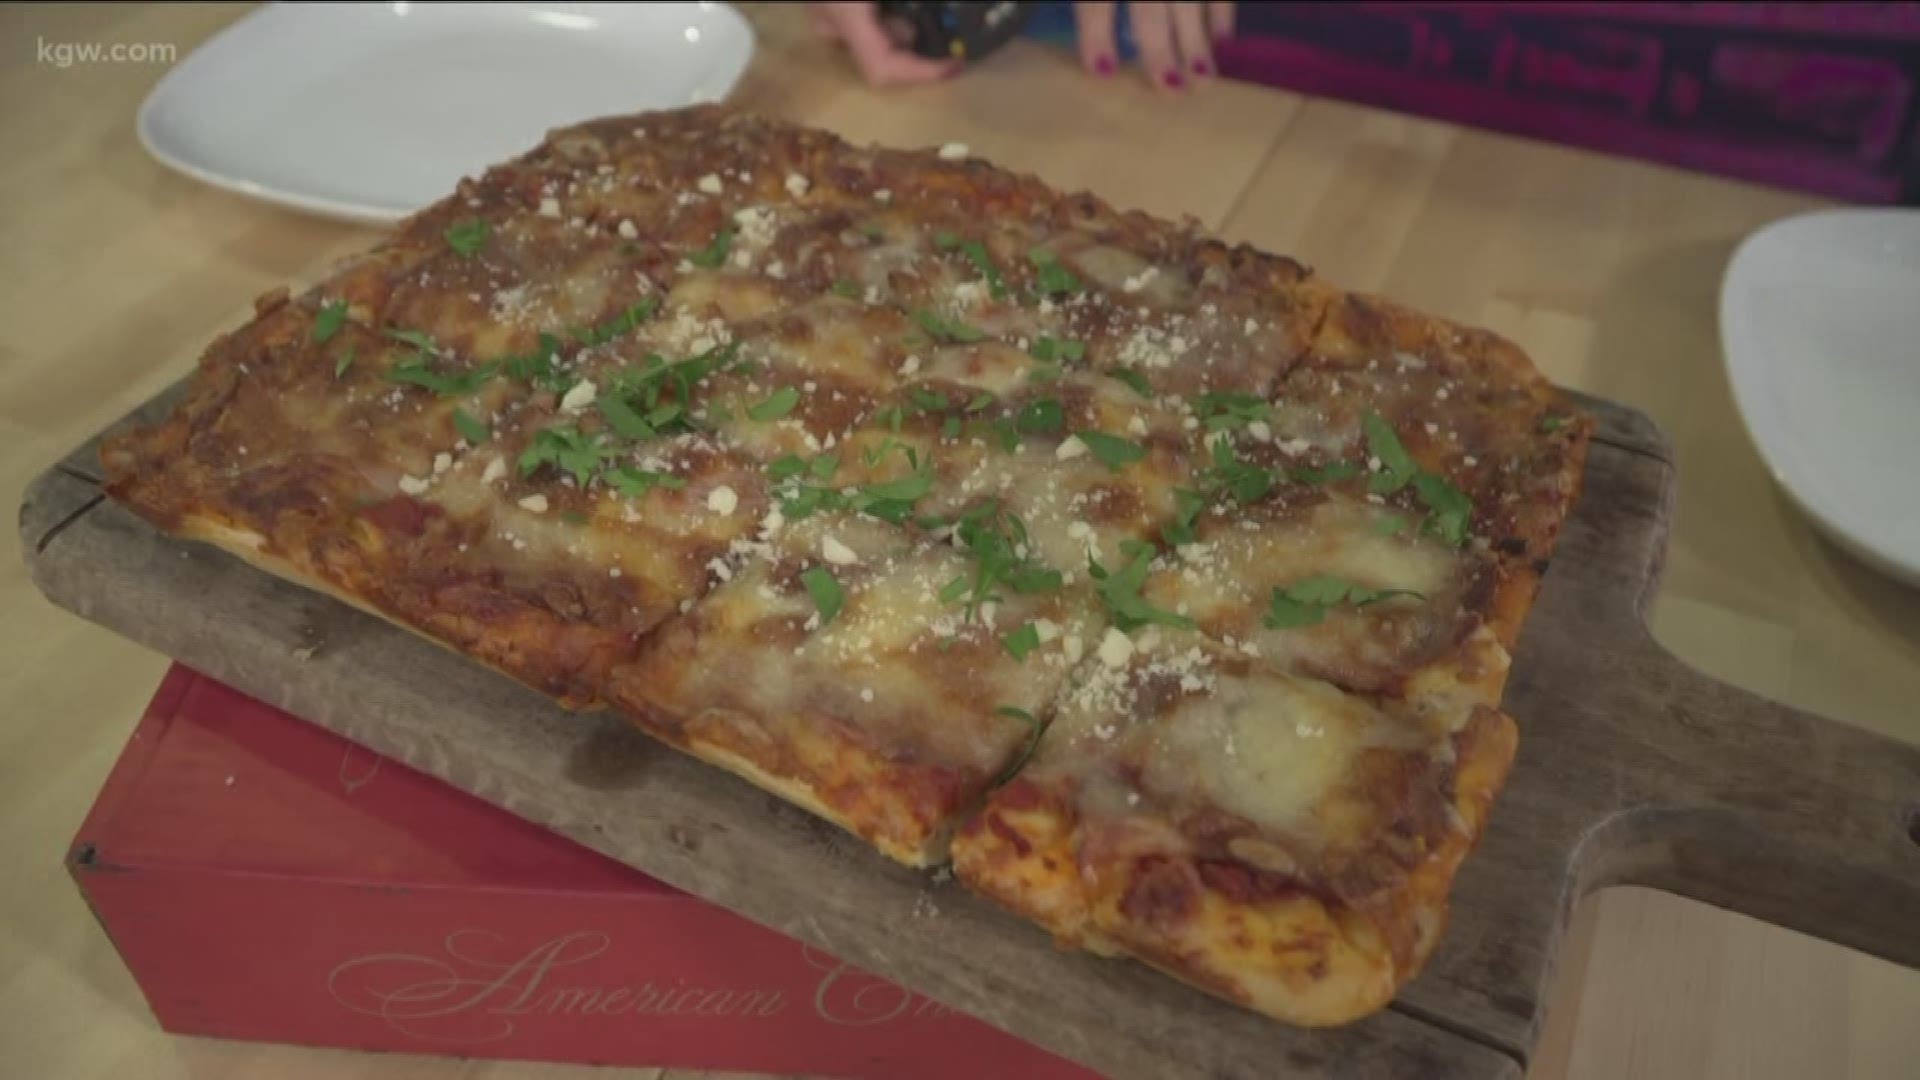 For the first time ever you can try the pizza that Olympia Provisions usually makes for their restaurant staff and at-home experiments.
olympiaprovisions.com
#TonightwithCassidy